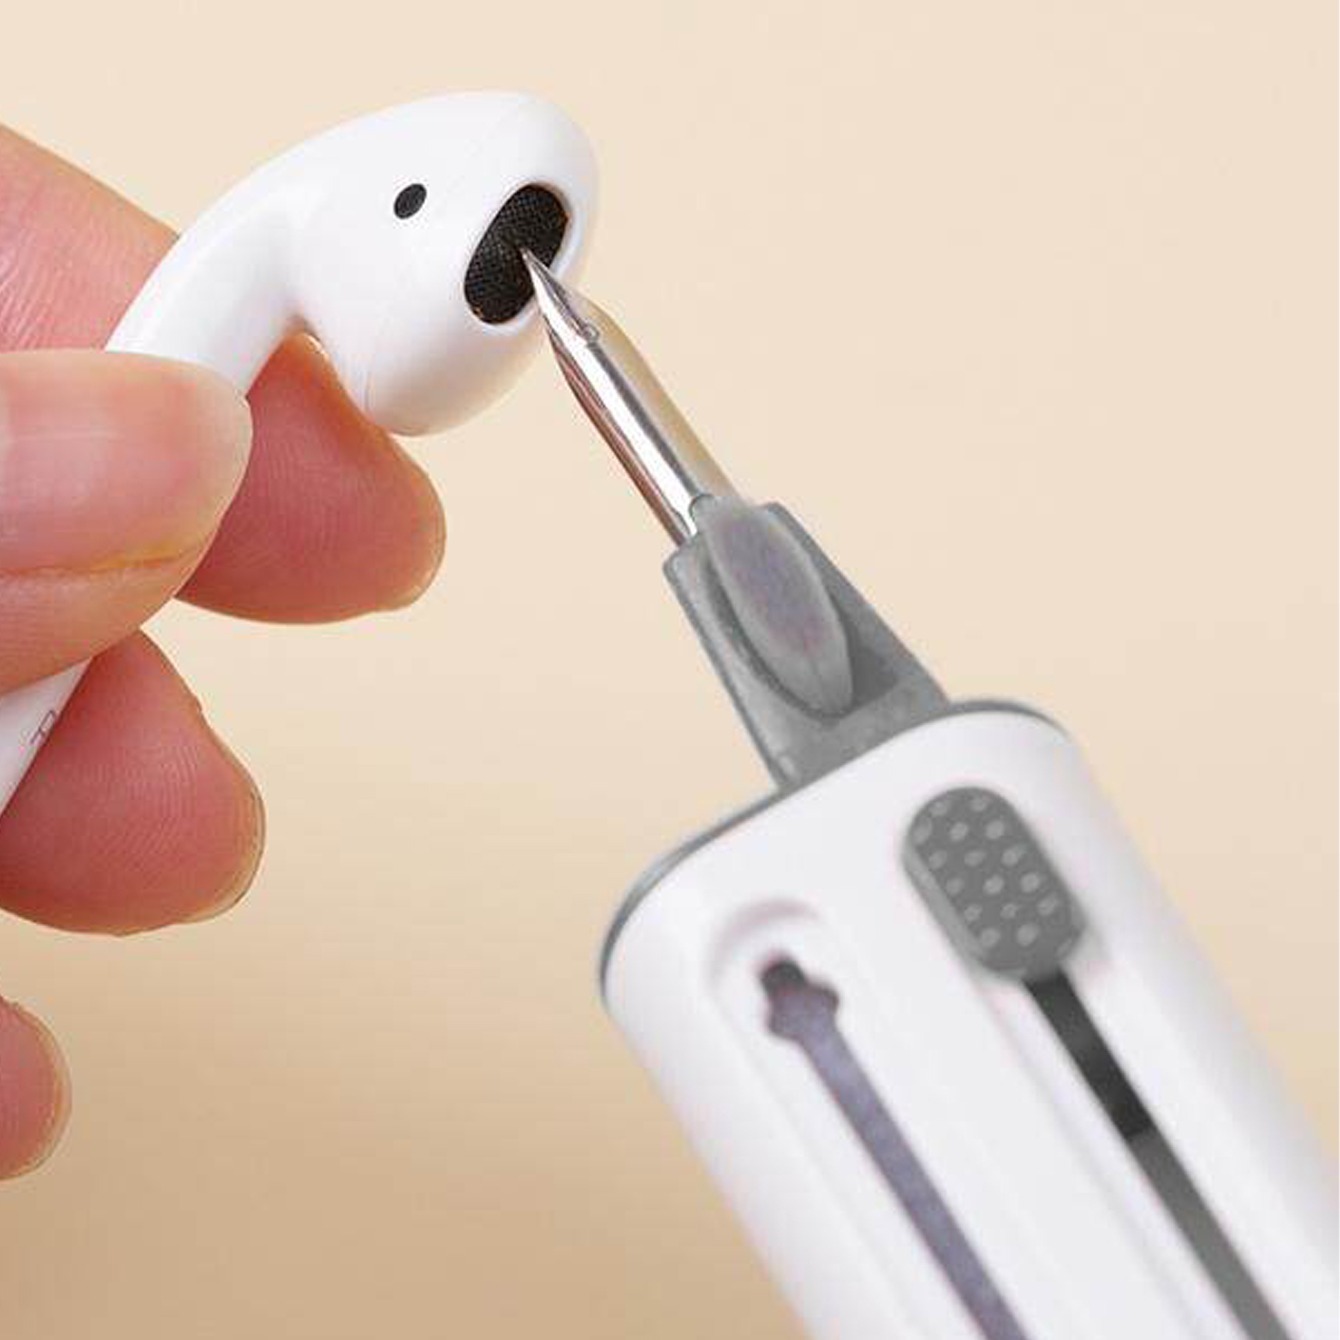 AirPods Earpods Keyboard Cleaner Kit - Multi Function White Cleaning Brush